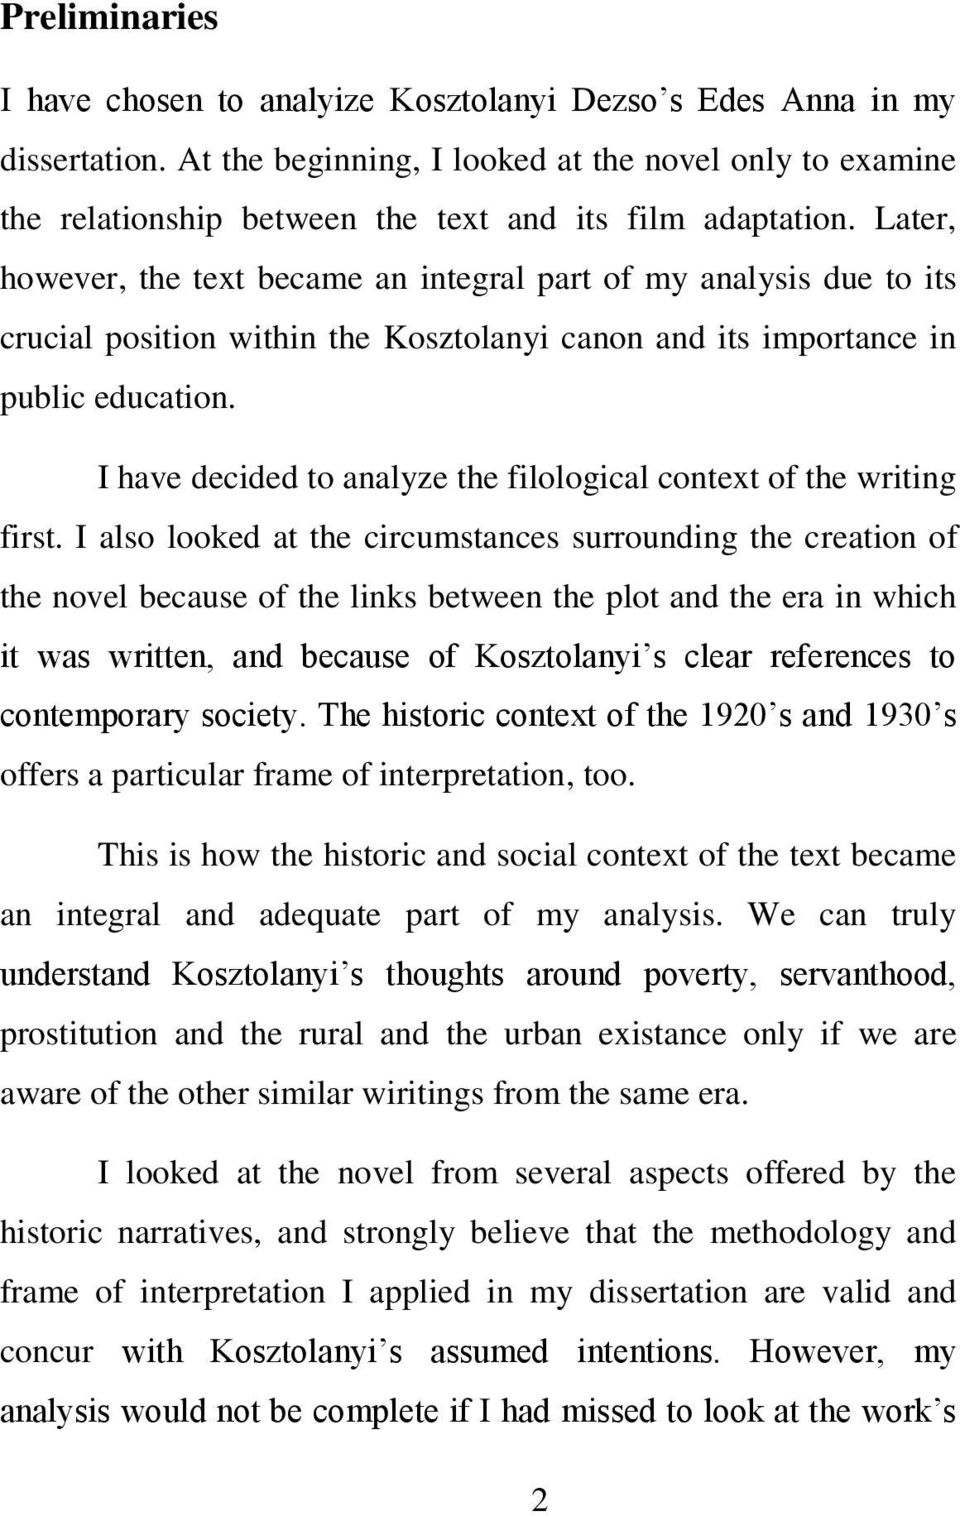 Later, however, the text became an integral part of my analysis due to its crucial position within the Kosztolanyi canon and its importance in public education.